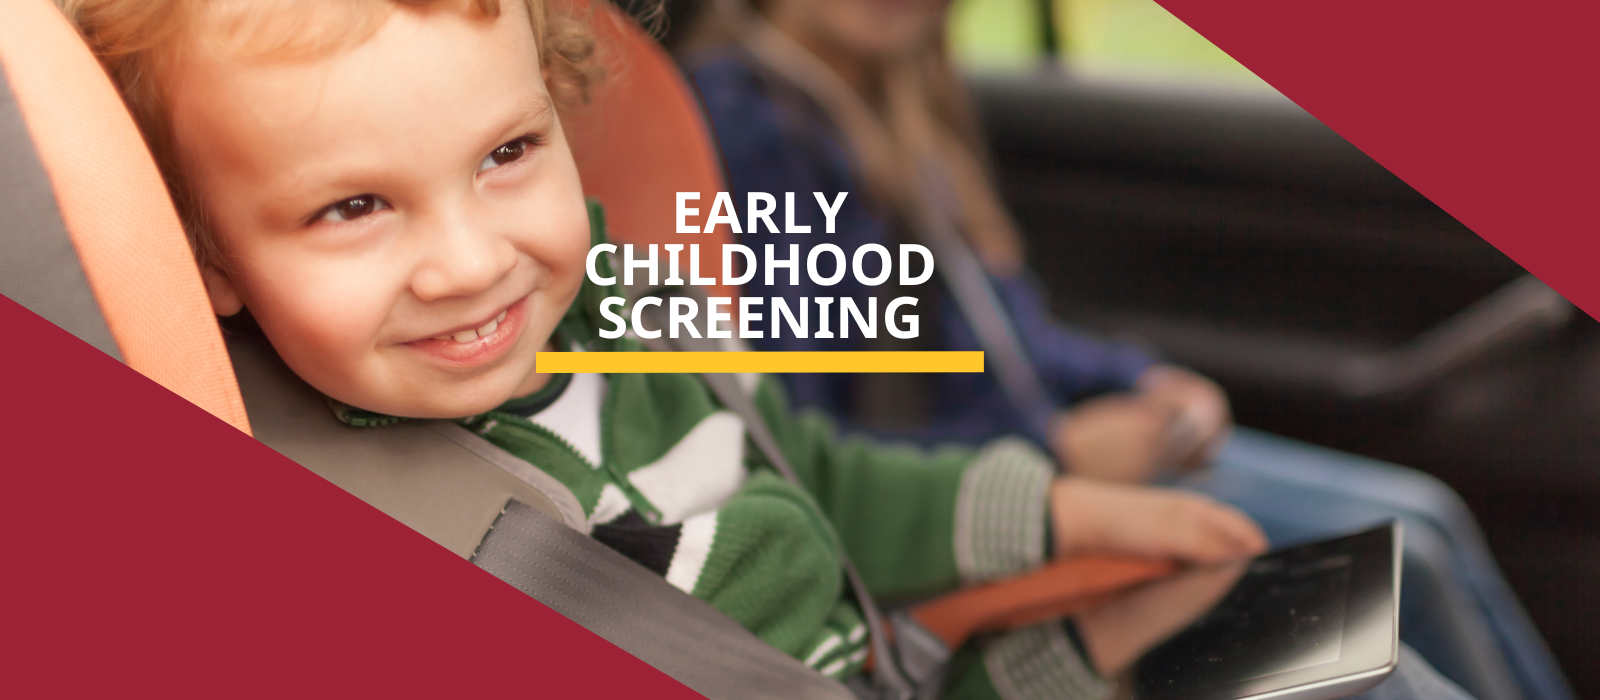 <h1>Developmental Screening for Infants to Preschoolers</h1>
<p>BPS101 offers free developmental screenings throughout the year to access children&#8217;s skills. These screenings are conducted by a team of District educators and specialists.</p>
<p>&nbsp;</p>
<a href="https://www.bps101.net/special-education-services/screening-evaluation-requests/" class="button ">Learn More</a>
<p>&nbsp;</p>
